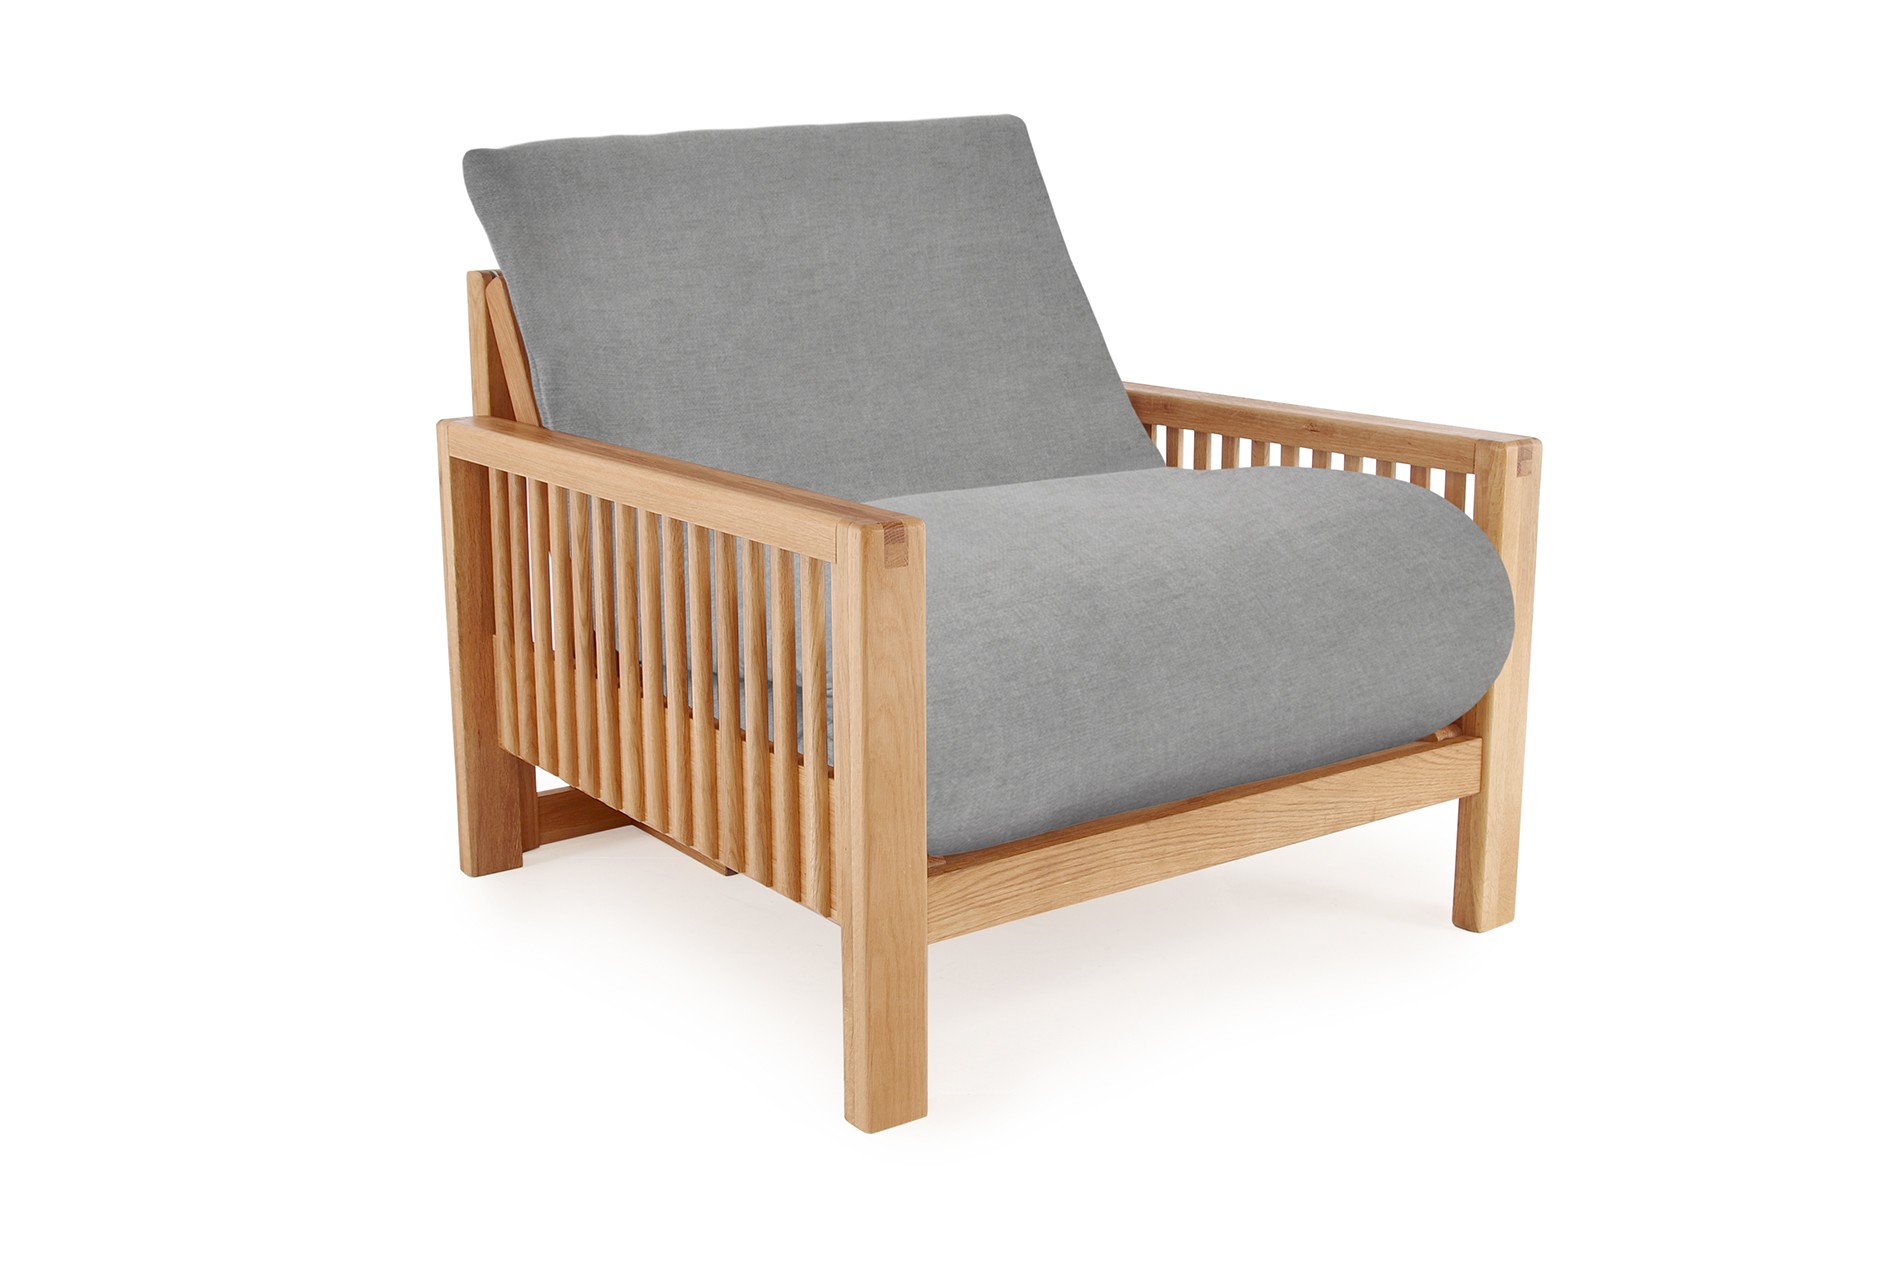 Oak Rondo Seat Sofa Bed Cosy Weave Oyster Grey